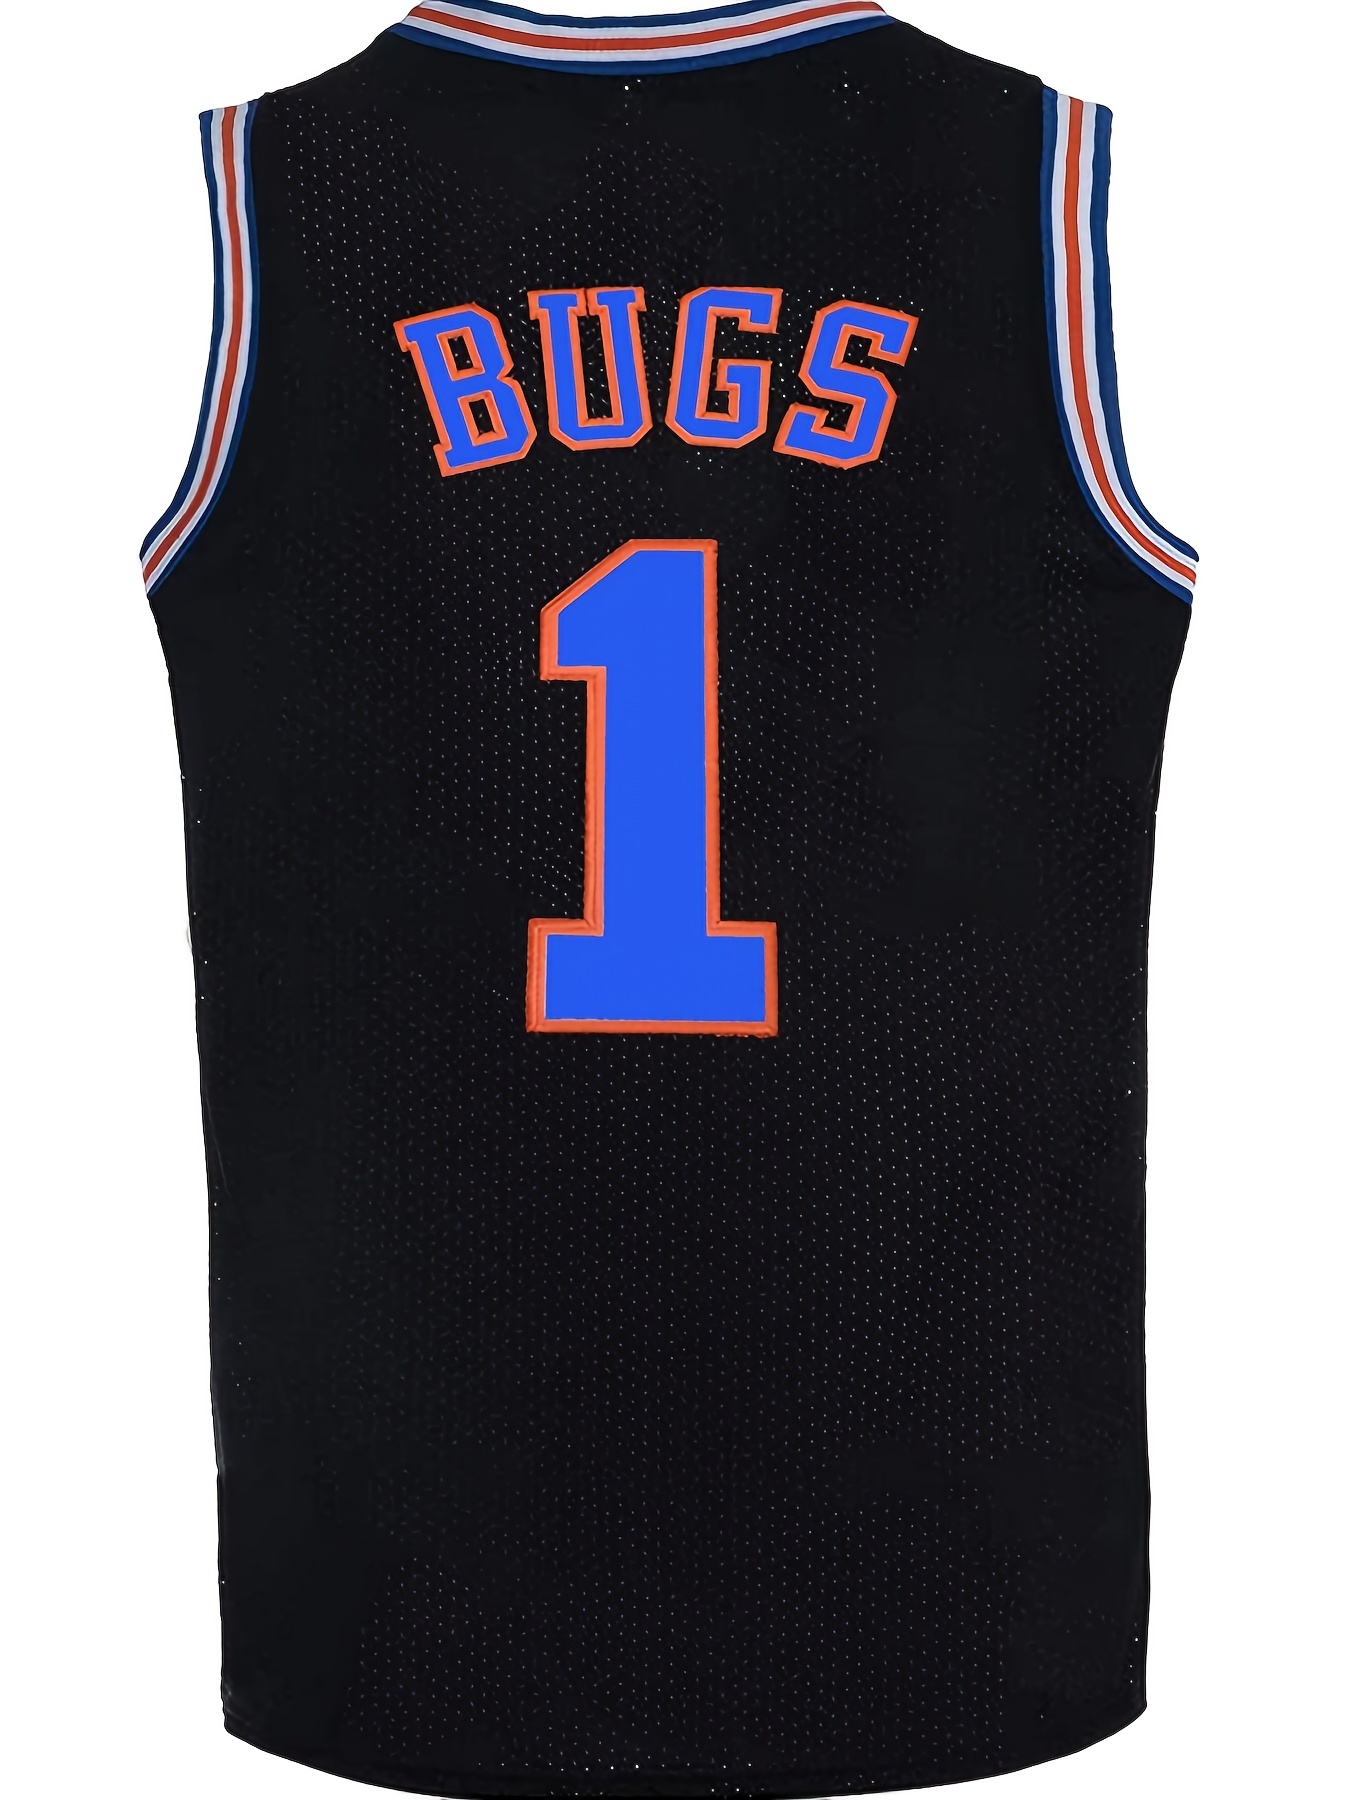 Movie Space Bugs Bunny Lola #10 Basketball Jersey Stitched Party